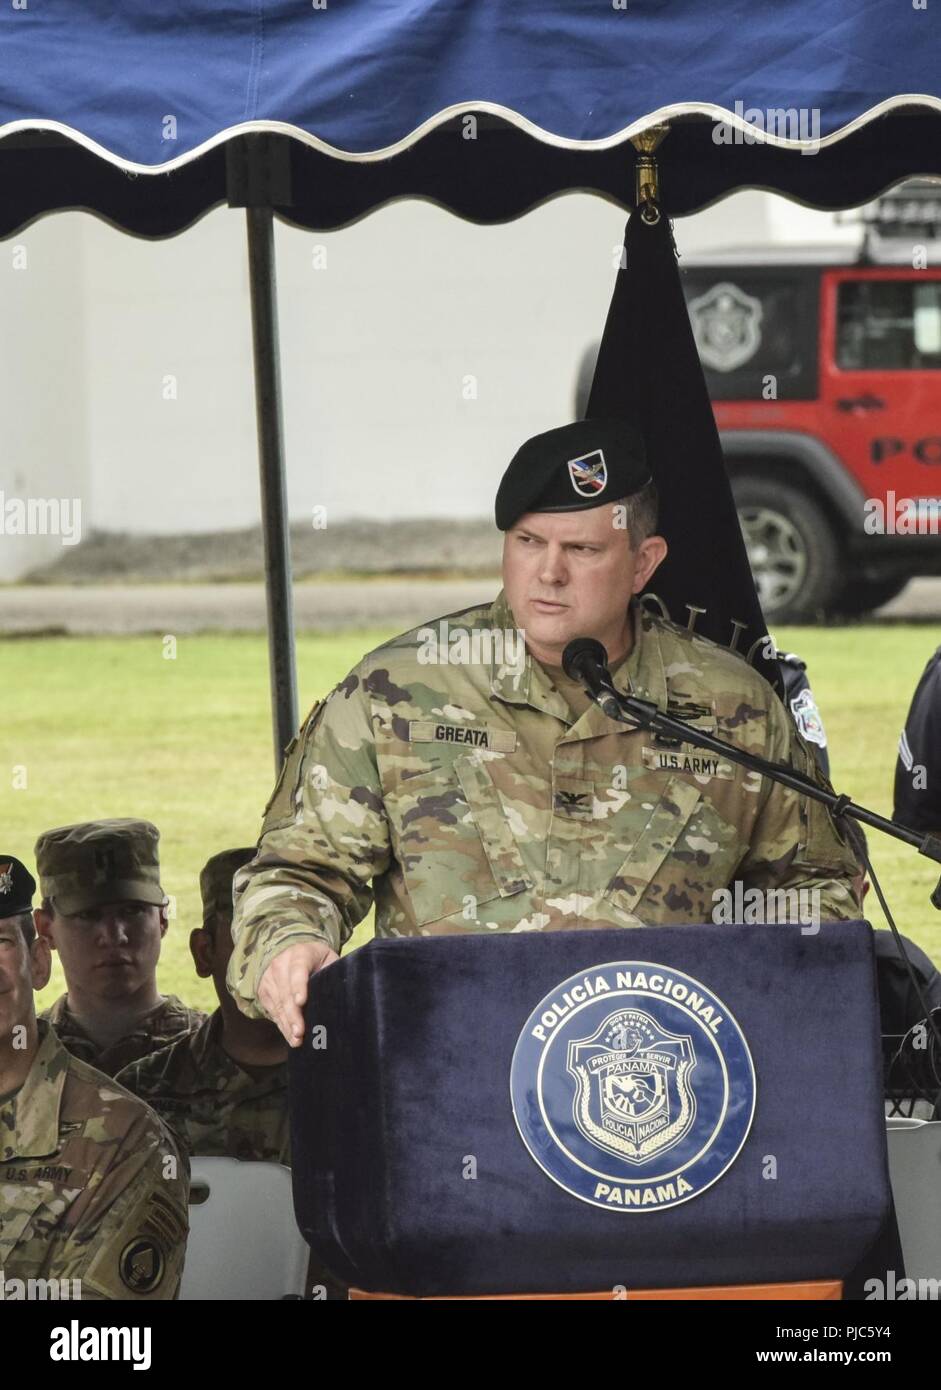 U.S. Army Col. Brian Greata, deputy commanding officer of Special Operations Command South speaks during the Fuerzas Comando opening ceremony July 16, 2018, at the Instituto Superior Policial, Panama. Fuerzas Comando is an annual multinational special operations forces skills competition sponsored by U.S. Southern Command and hosted this year by the Ministry of Public Security, Panama. Through friendly competition, this exercise promotes interoperability, military-to-military relationships, increases training knowledge, and improves regional security. Stock Photo